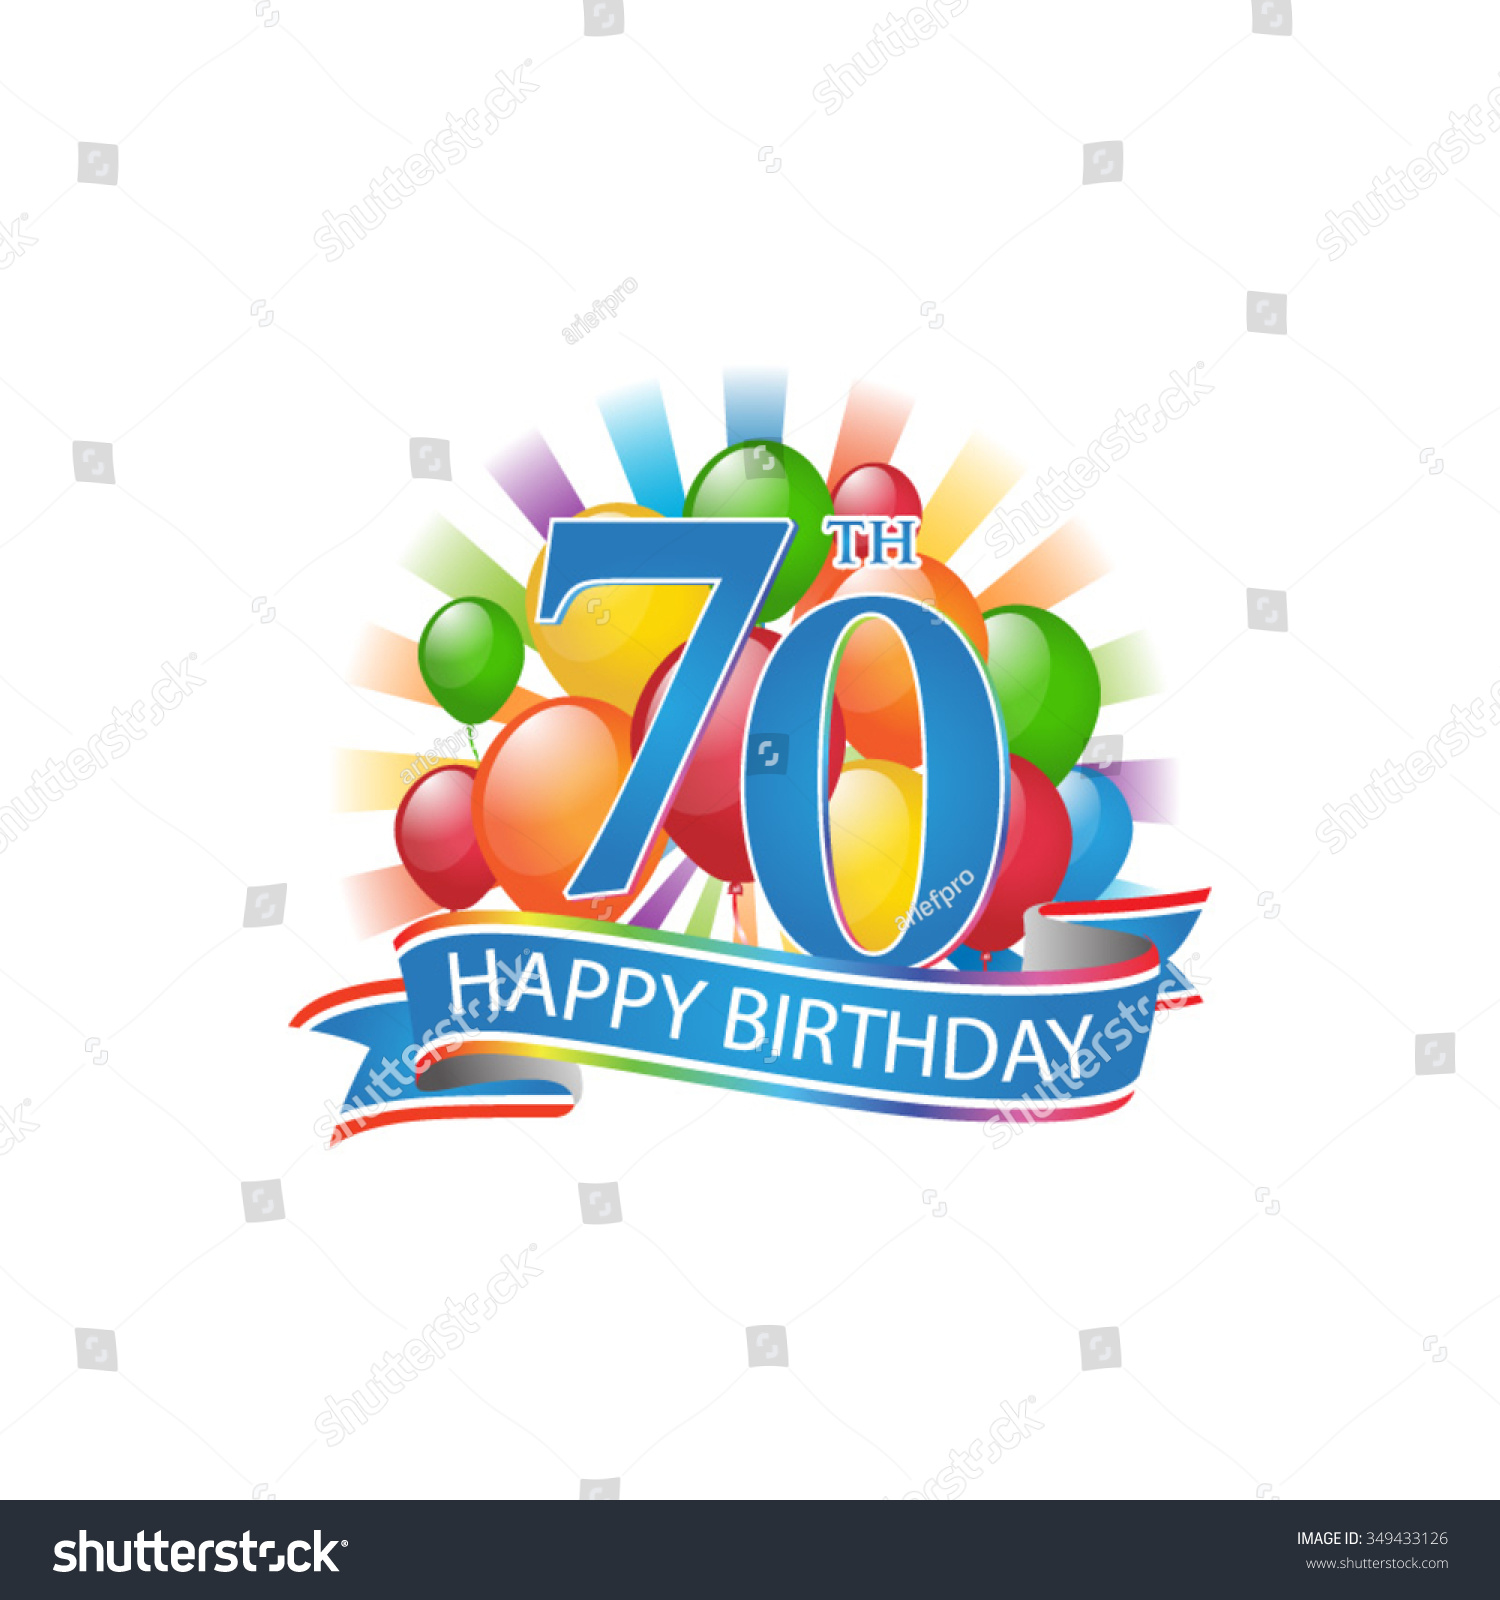 SVG of 70th colorful happy birthday logo with balloons and burst of light svg